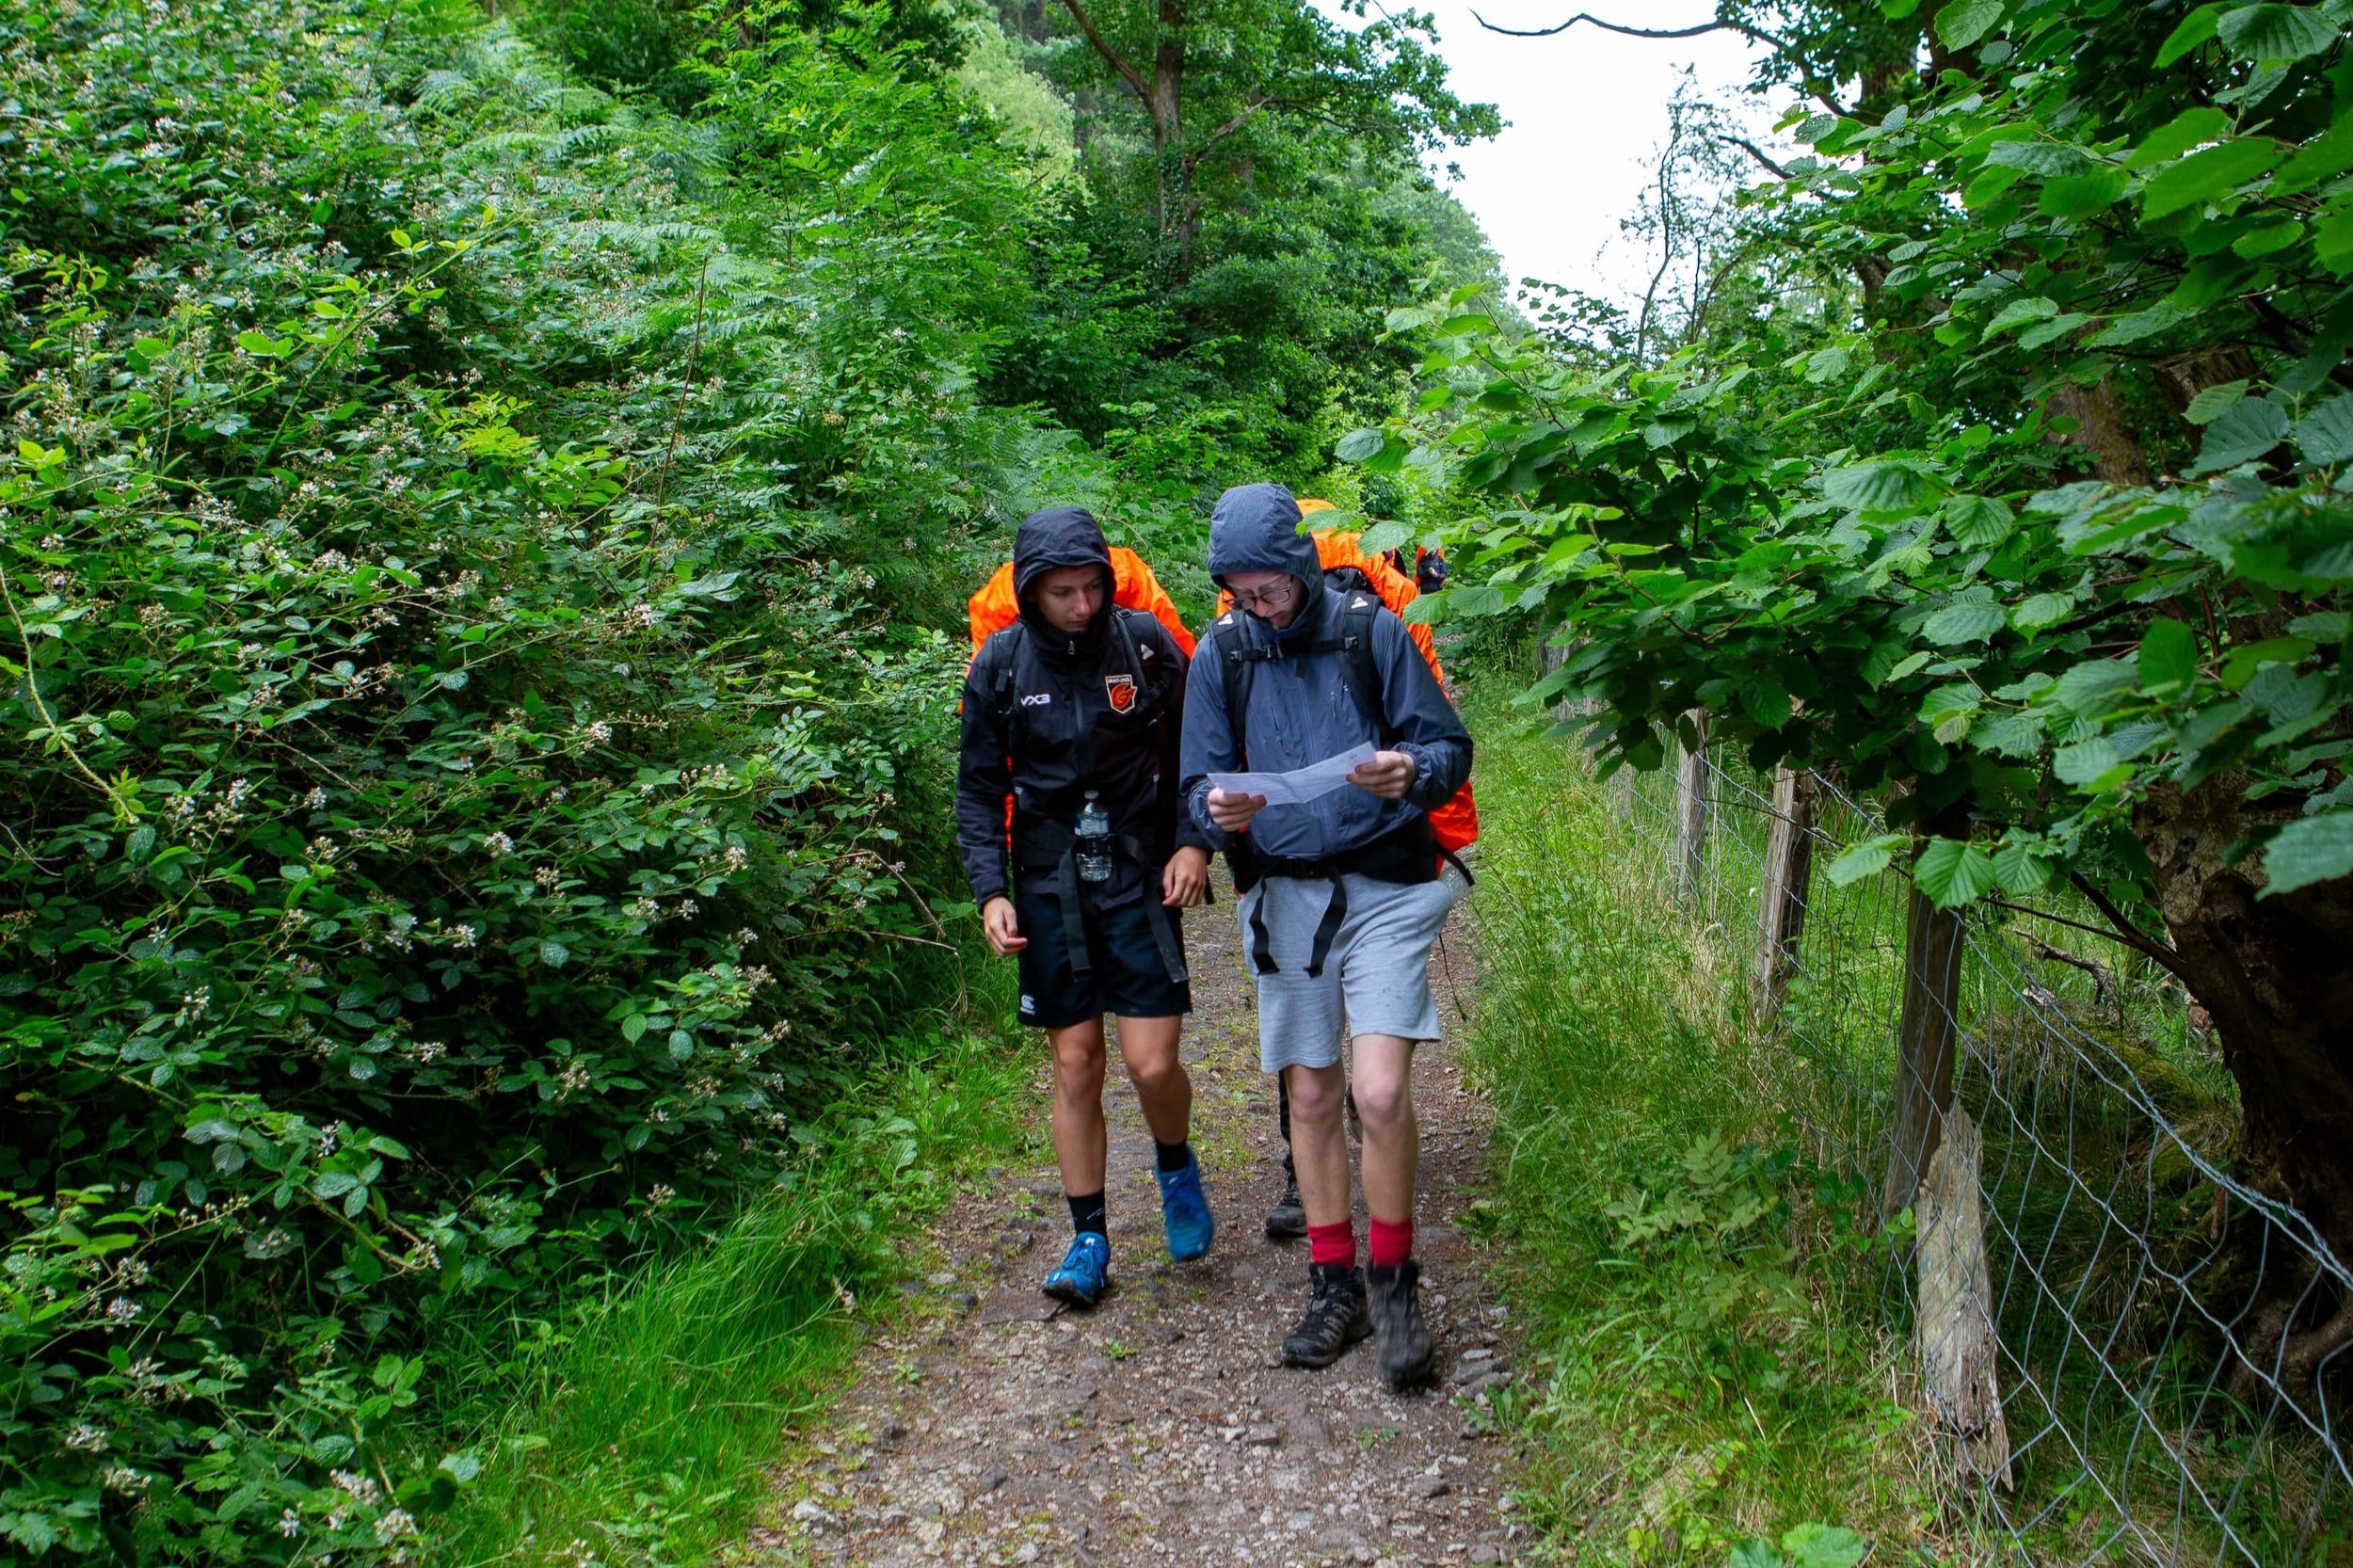 DofE+with+schools+at+Park+Bryn+Bach+Map+reading.jpg